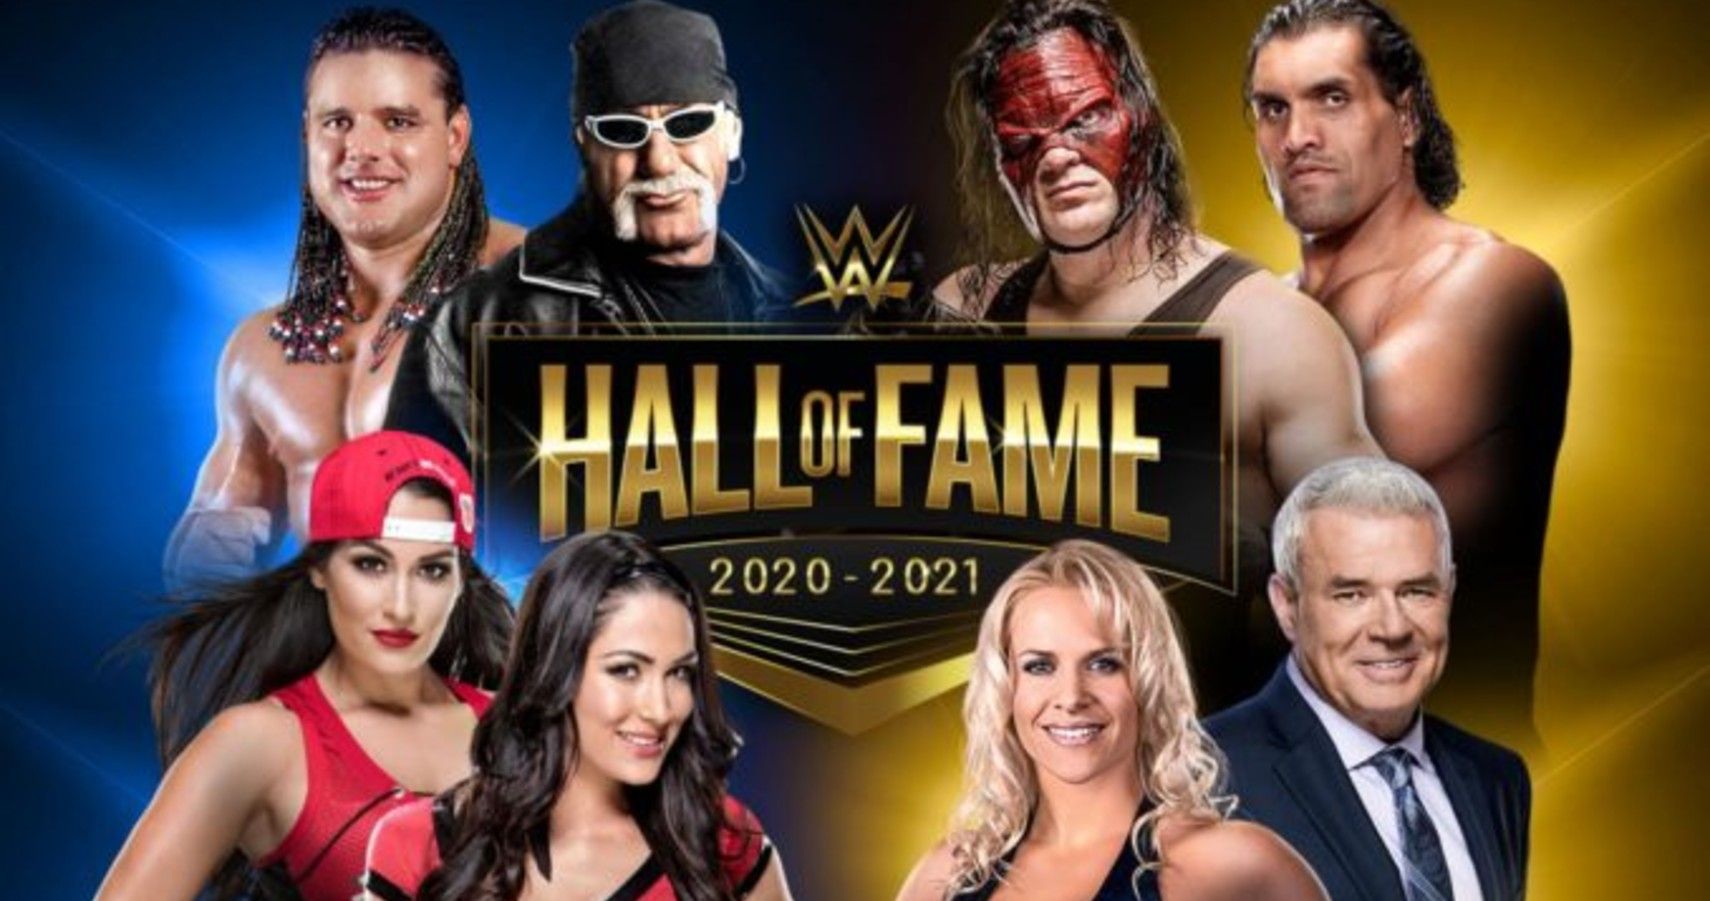 Every Legacy Star Inducted Into Wwes 2020 And 2021 Hall Of Fame Classes